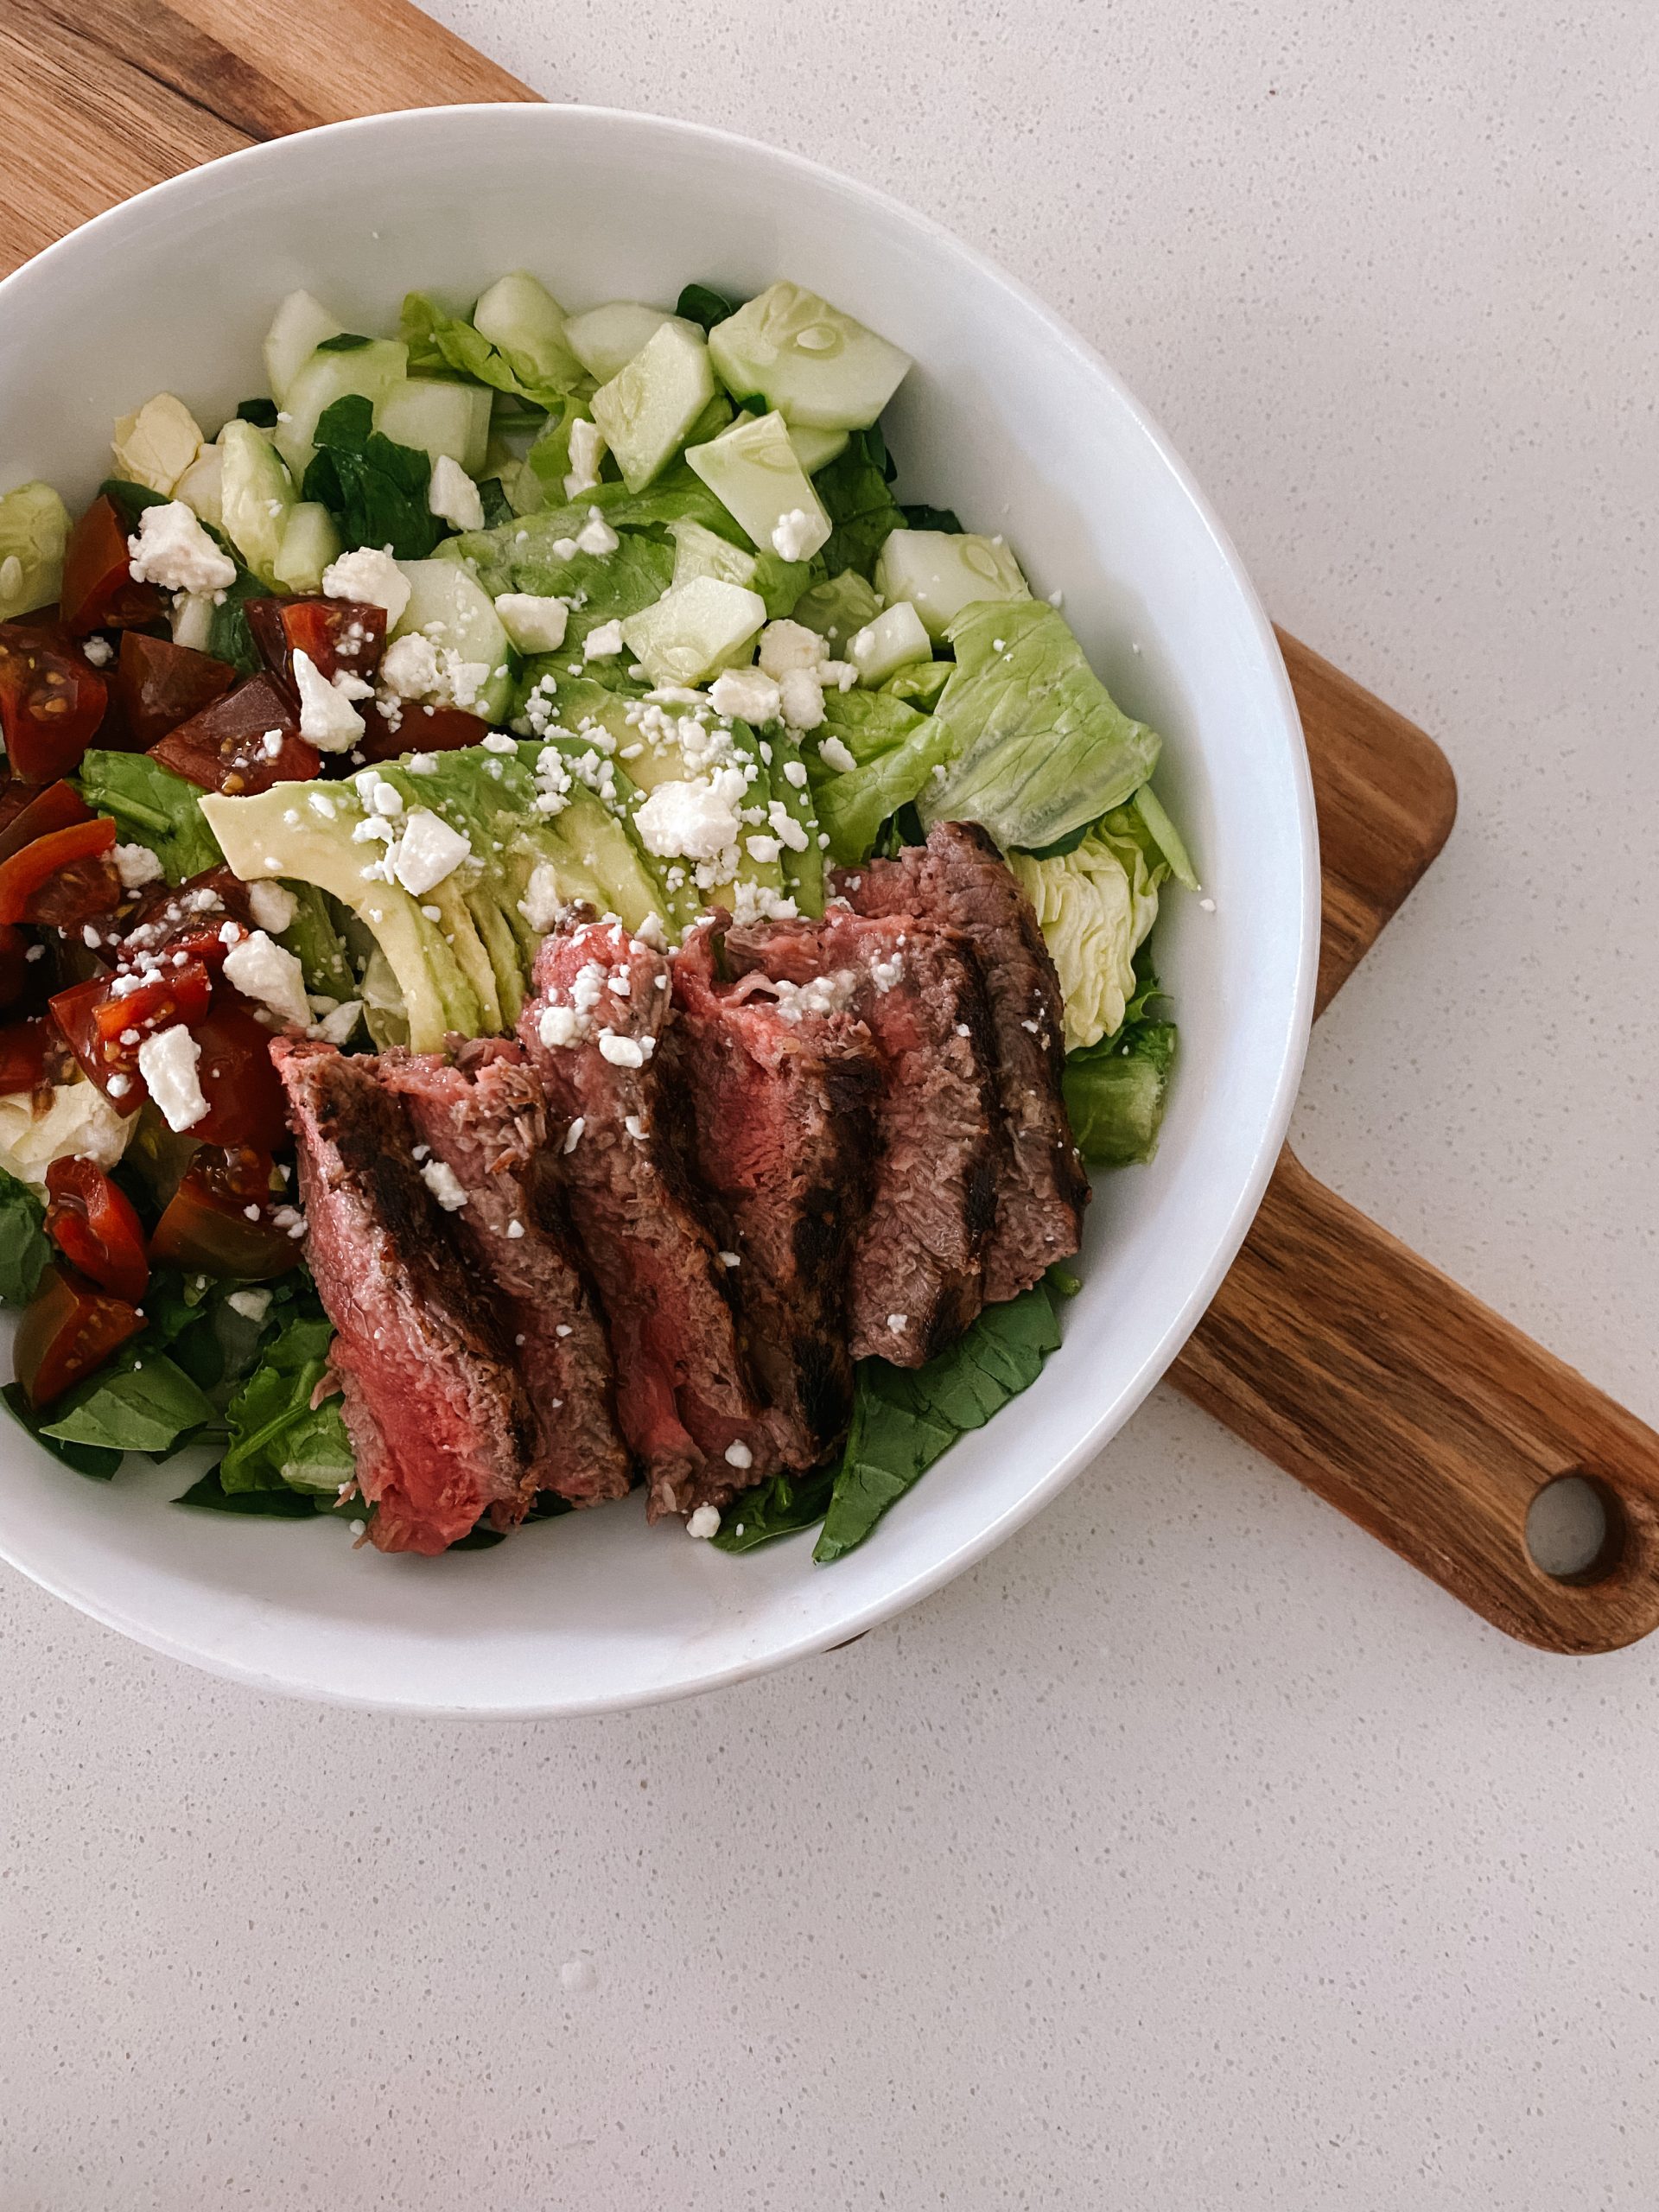 The Best Steak Salad with Tangy Salad Dressing - is there anything better?! This salad is a delicious summertime staple.